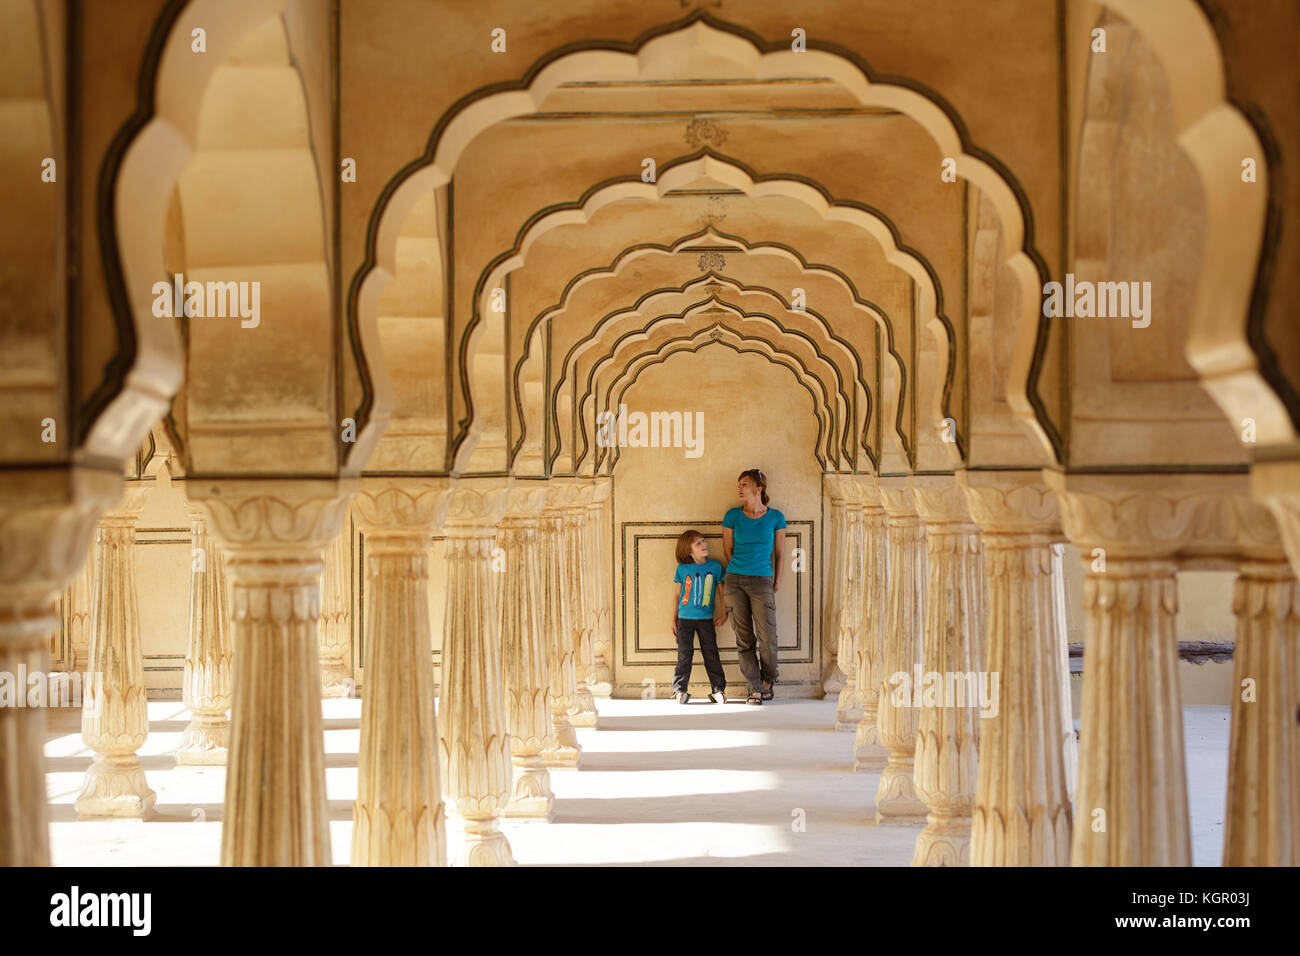 Mother and son standing in the archway at Amer Fort, Jaipur, Rajasthan, India. Stock Photo